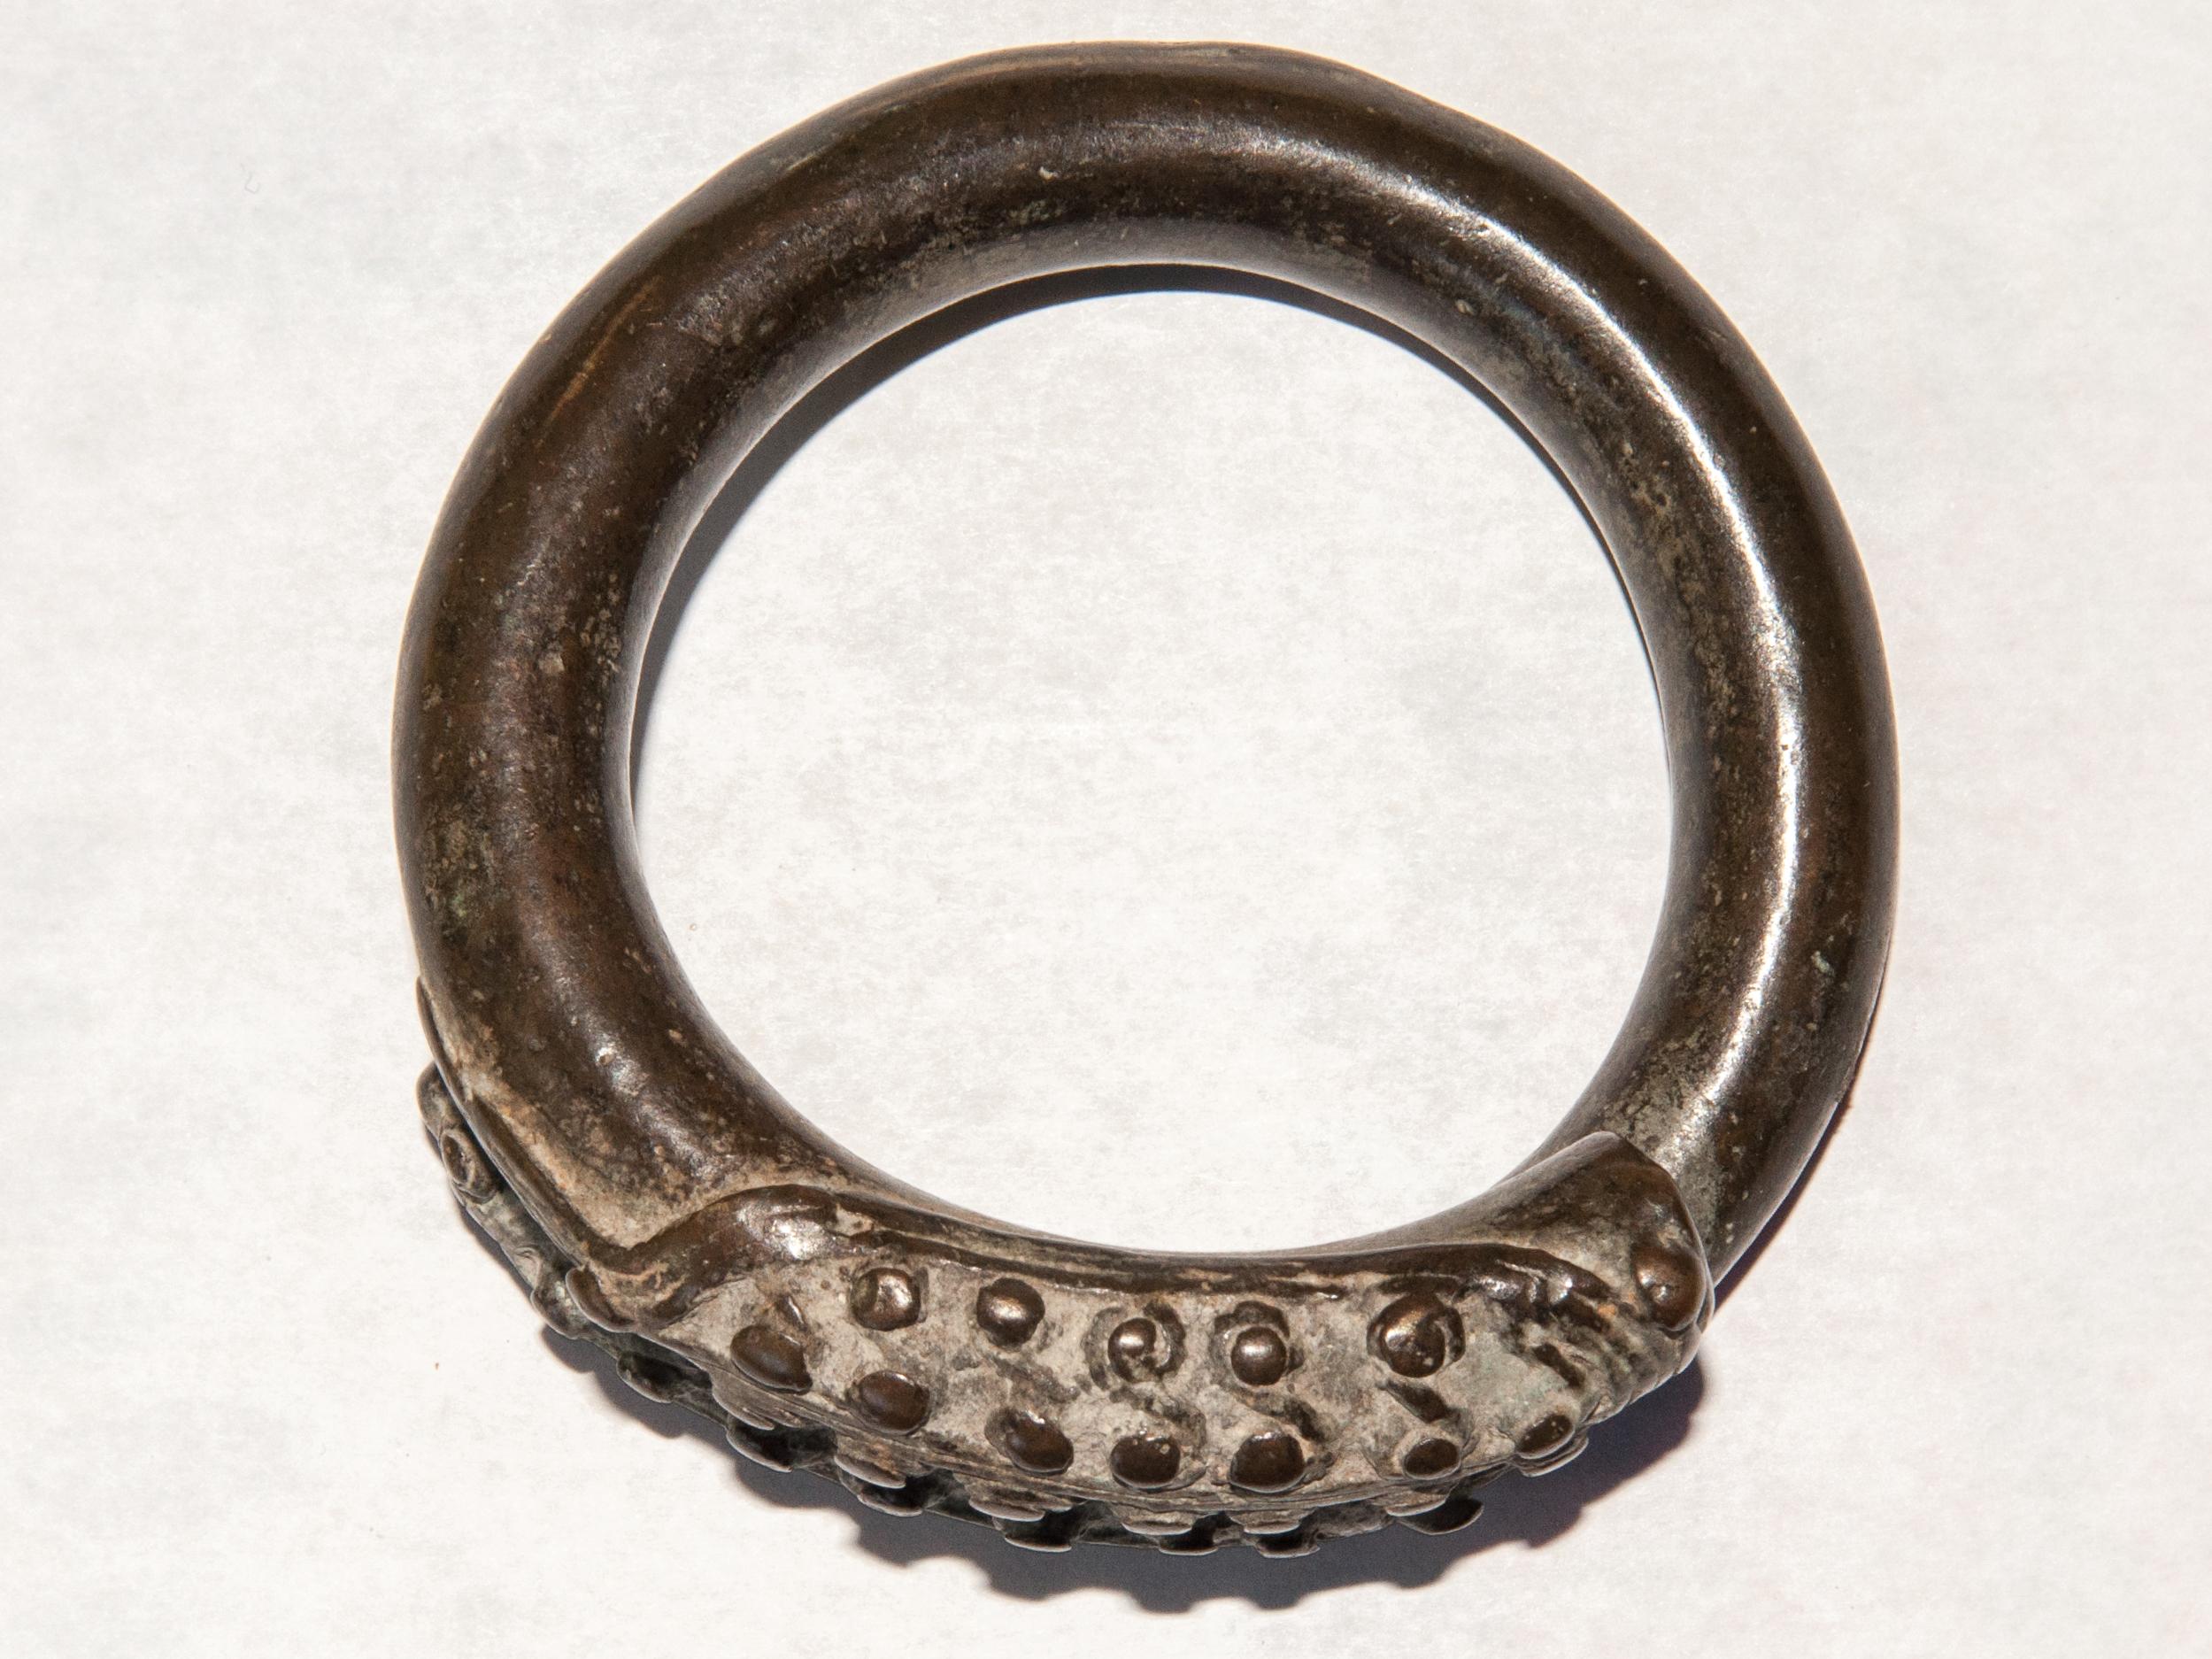 Antique Bronze Bracelet from Laos with a Naga or Serpent Motif, 18th Century 3